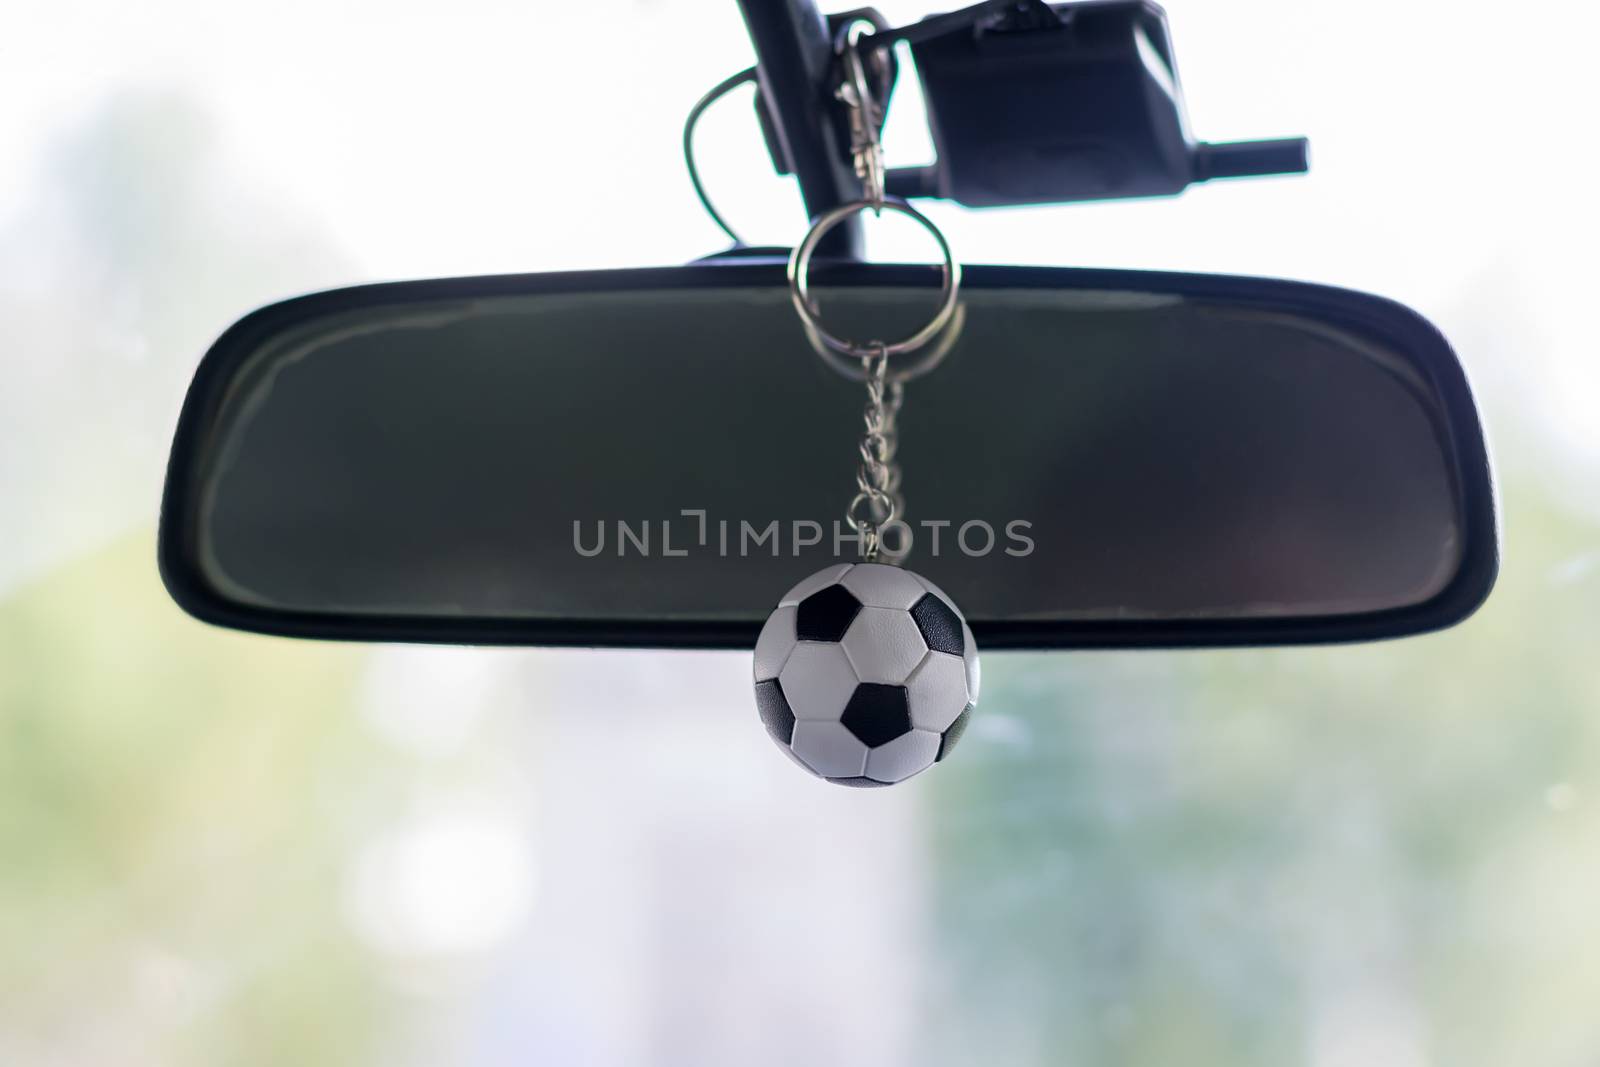 keychain small soccer ball hanging on the rear view mirror in the car near the windshield